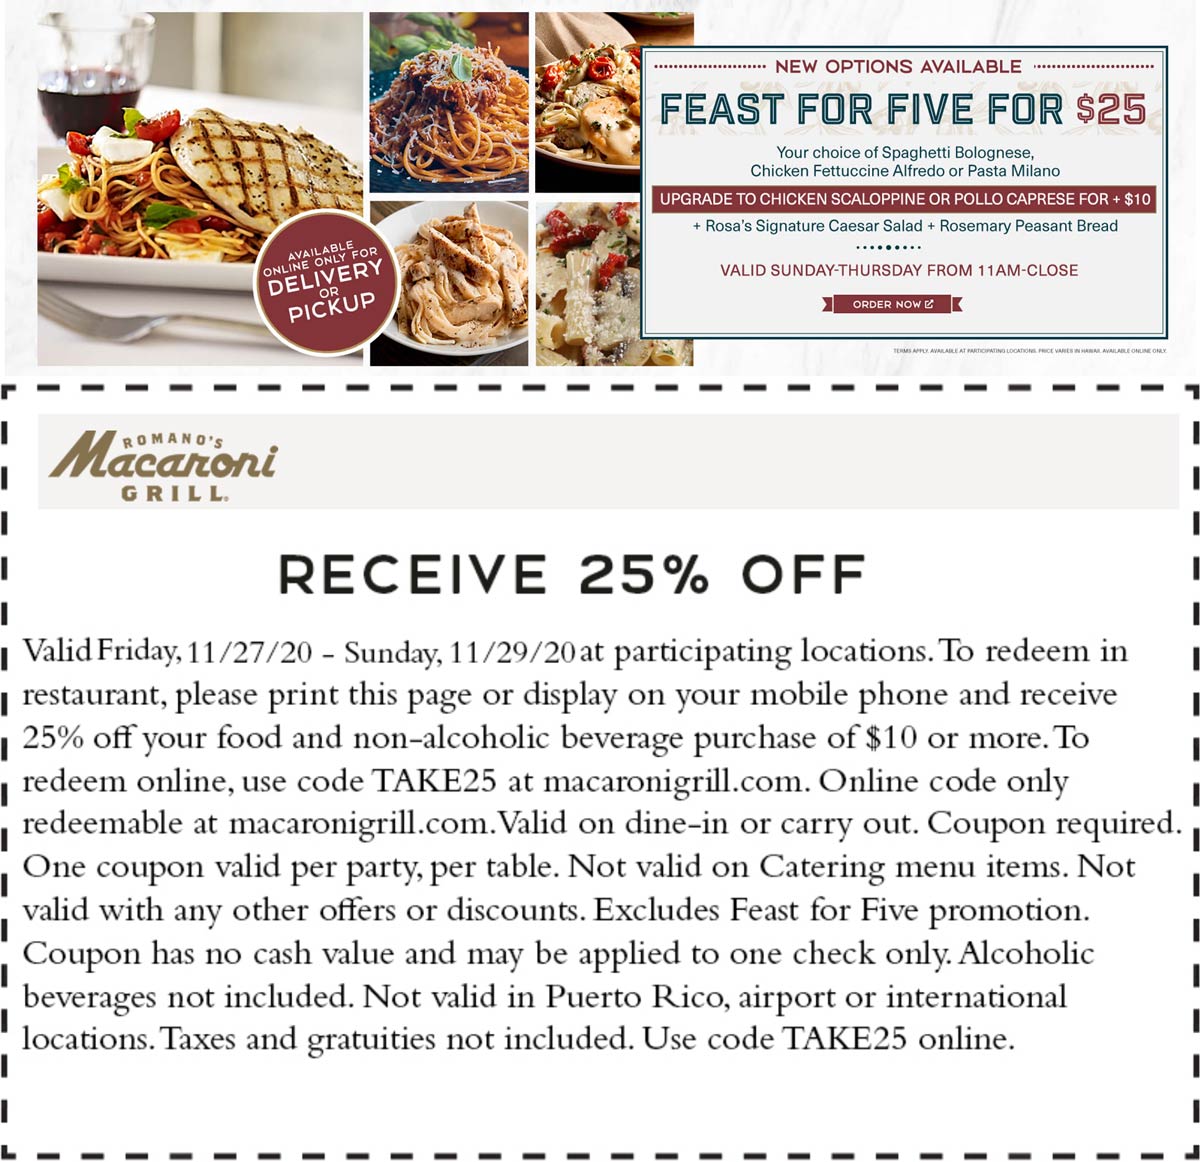 Macaroni Grill restaurants Coupon  25% off today at Macaroni Grill restaurants #macaronigrill 